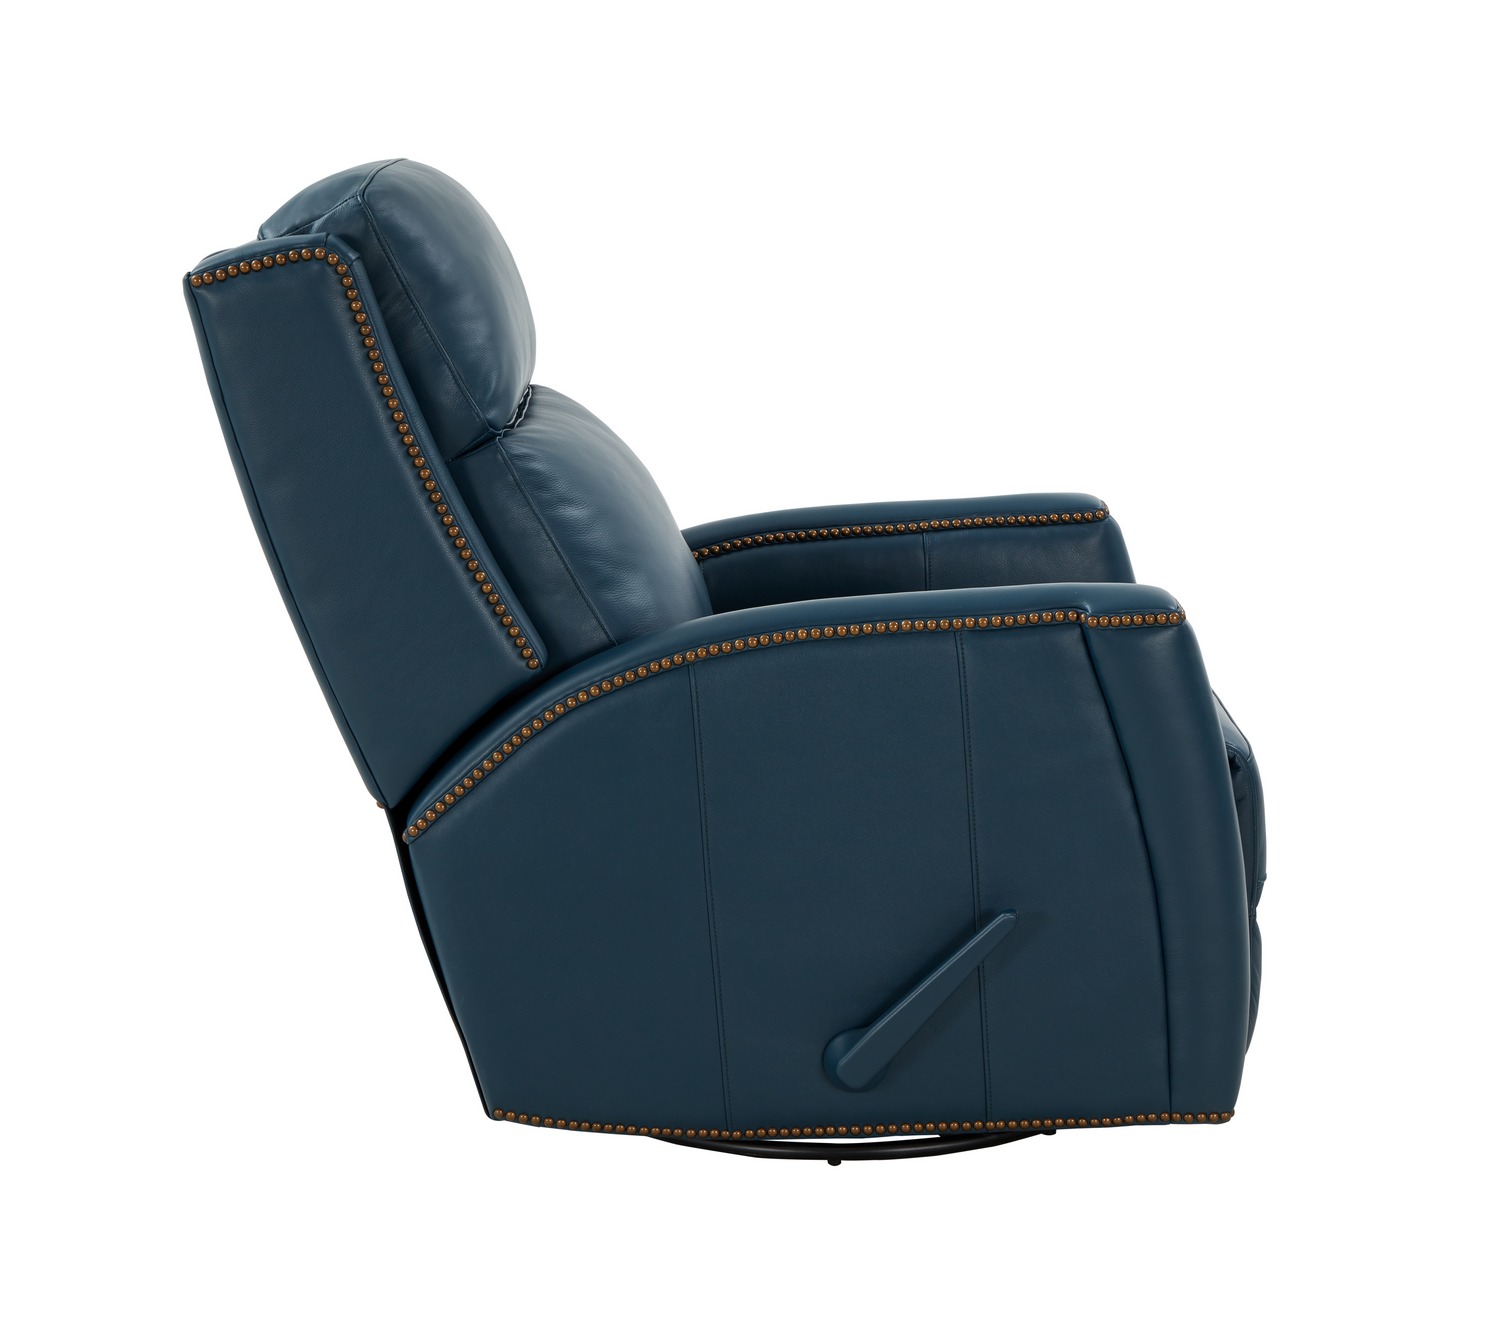 Barcalounger Brandt Swivel Glider Recliner Chair - Prestin Yale Blue/All Leather